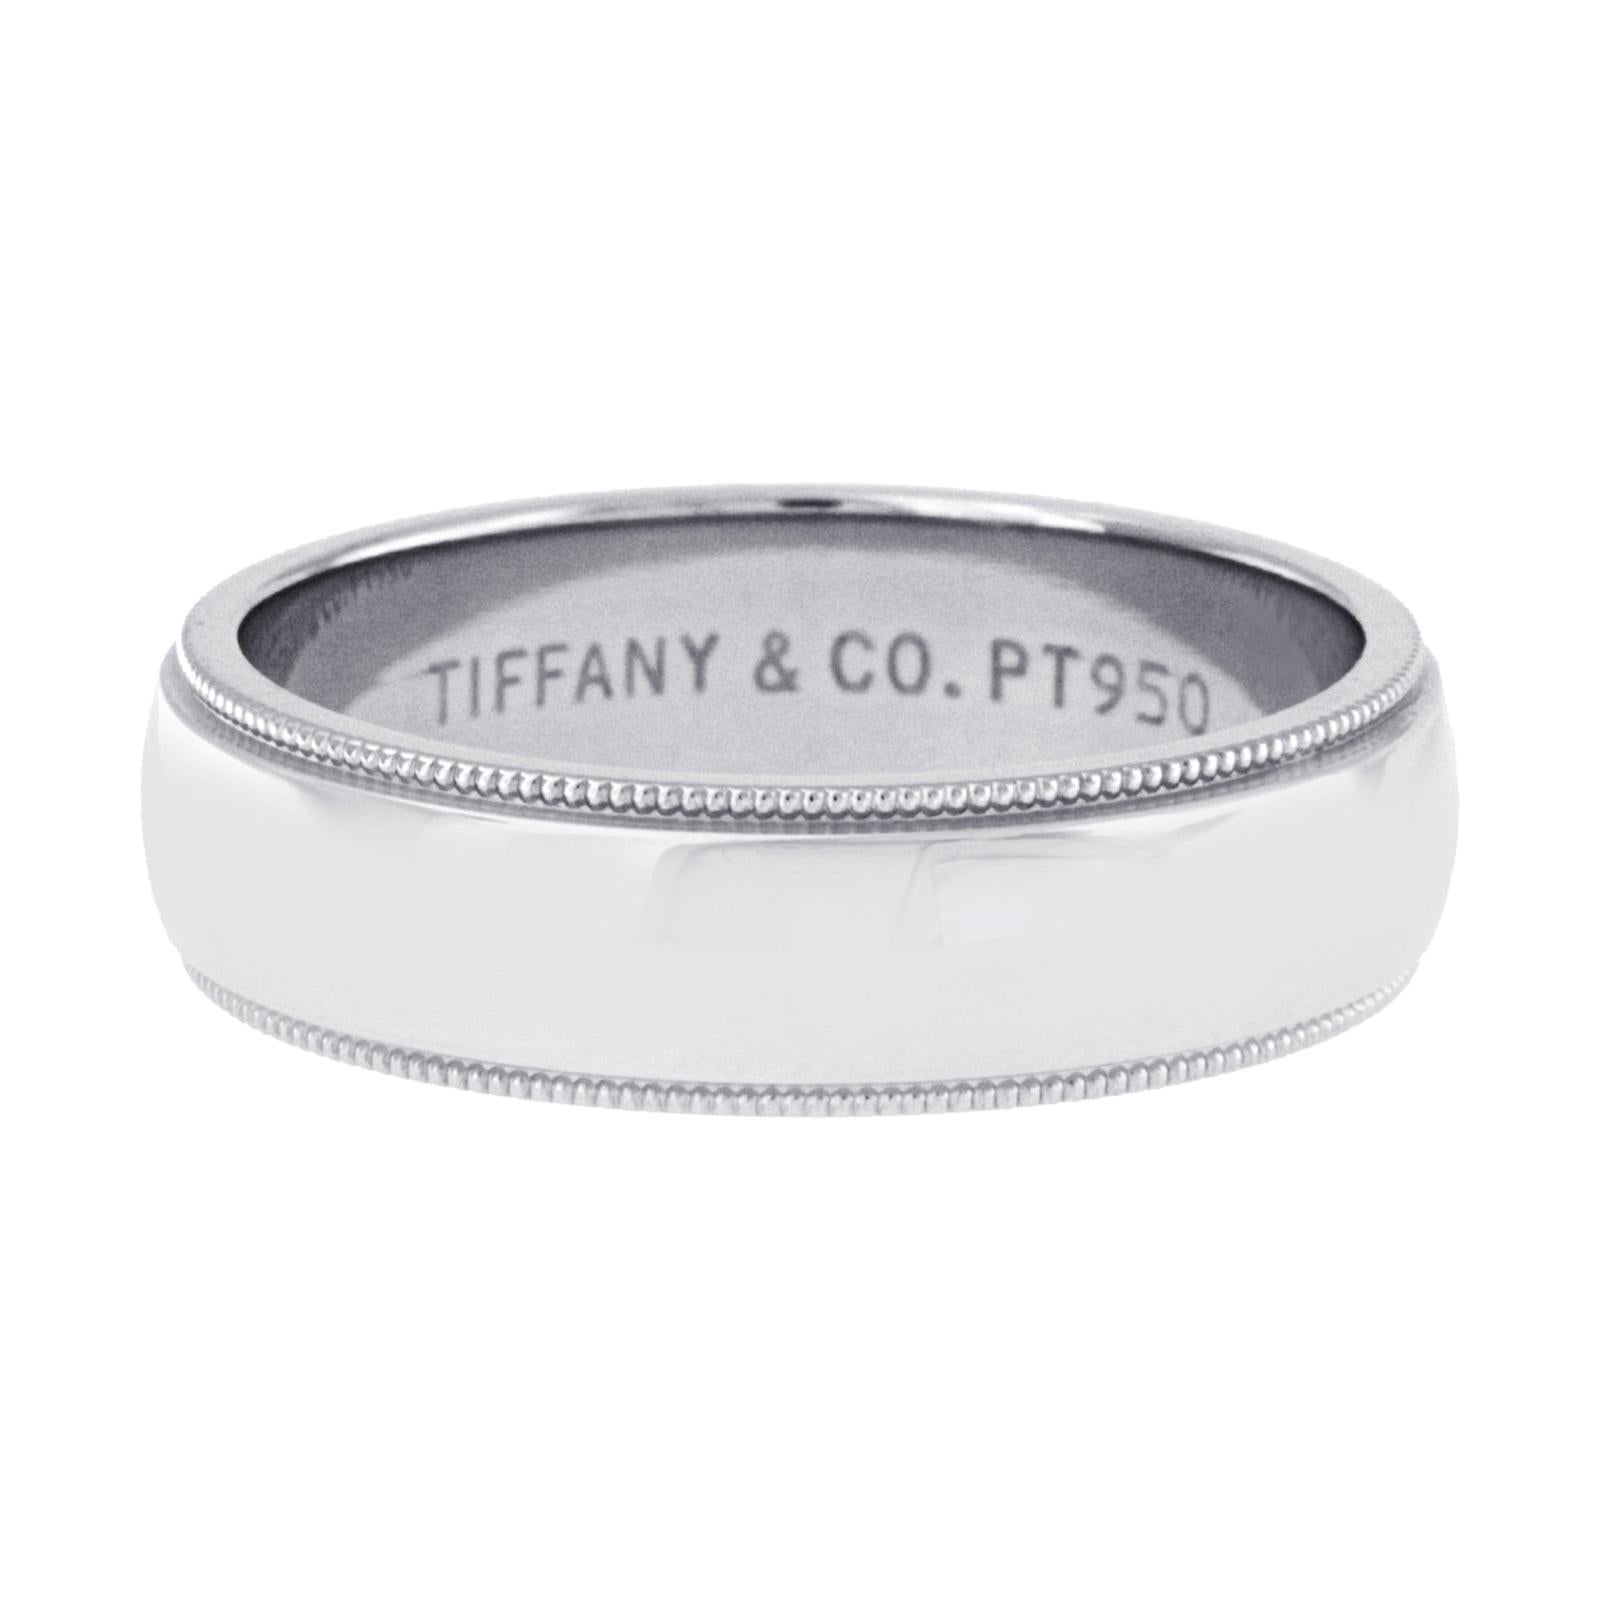 Authentic Tiffany and Co. Platinum 950 